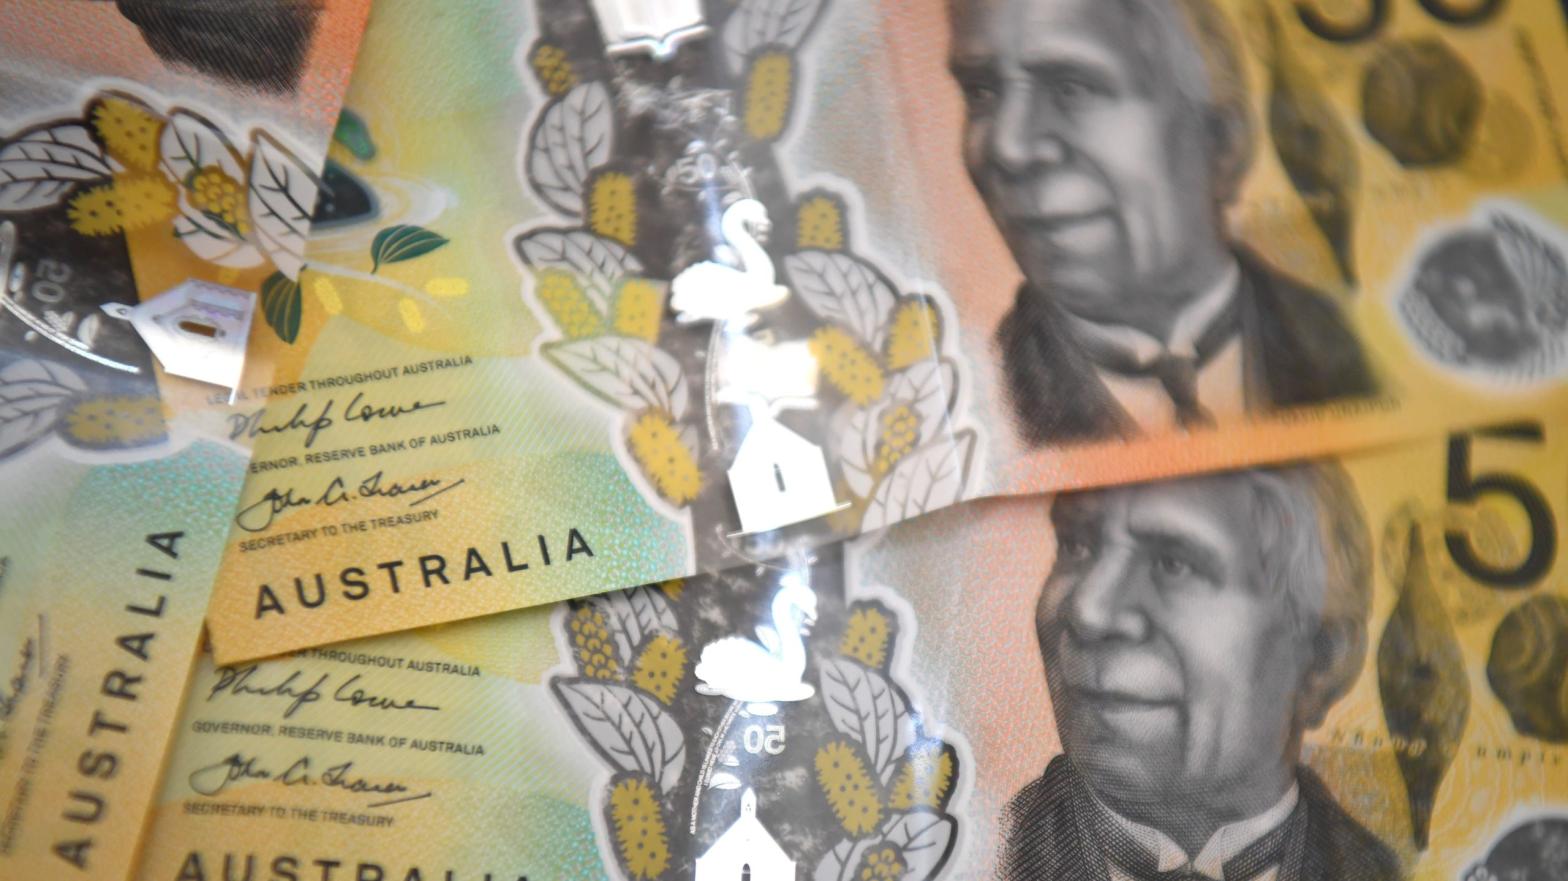 This photo illustration shows three Australian banknotes taken in Melbourne on October 12, 2020. (Photo: William West, Getty Images)